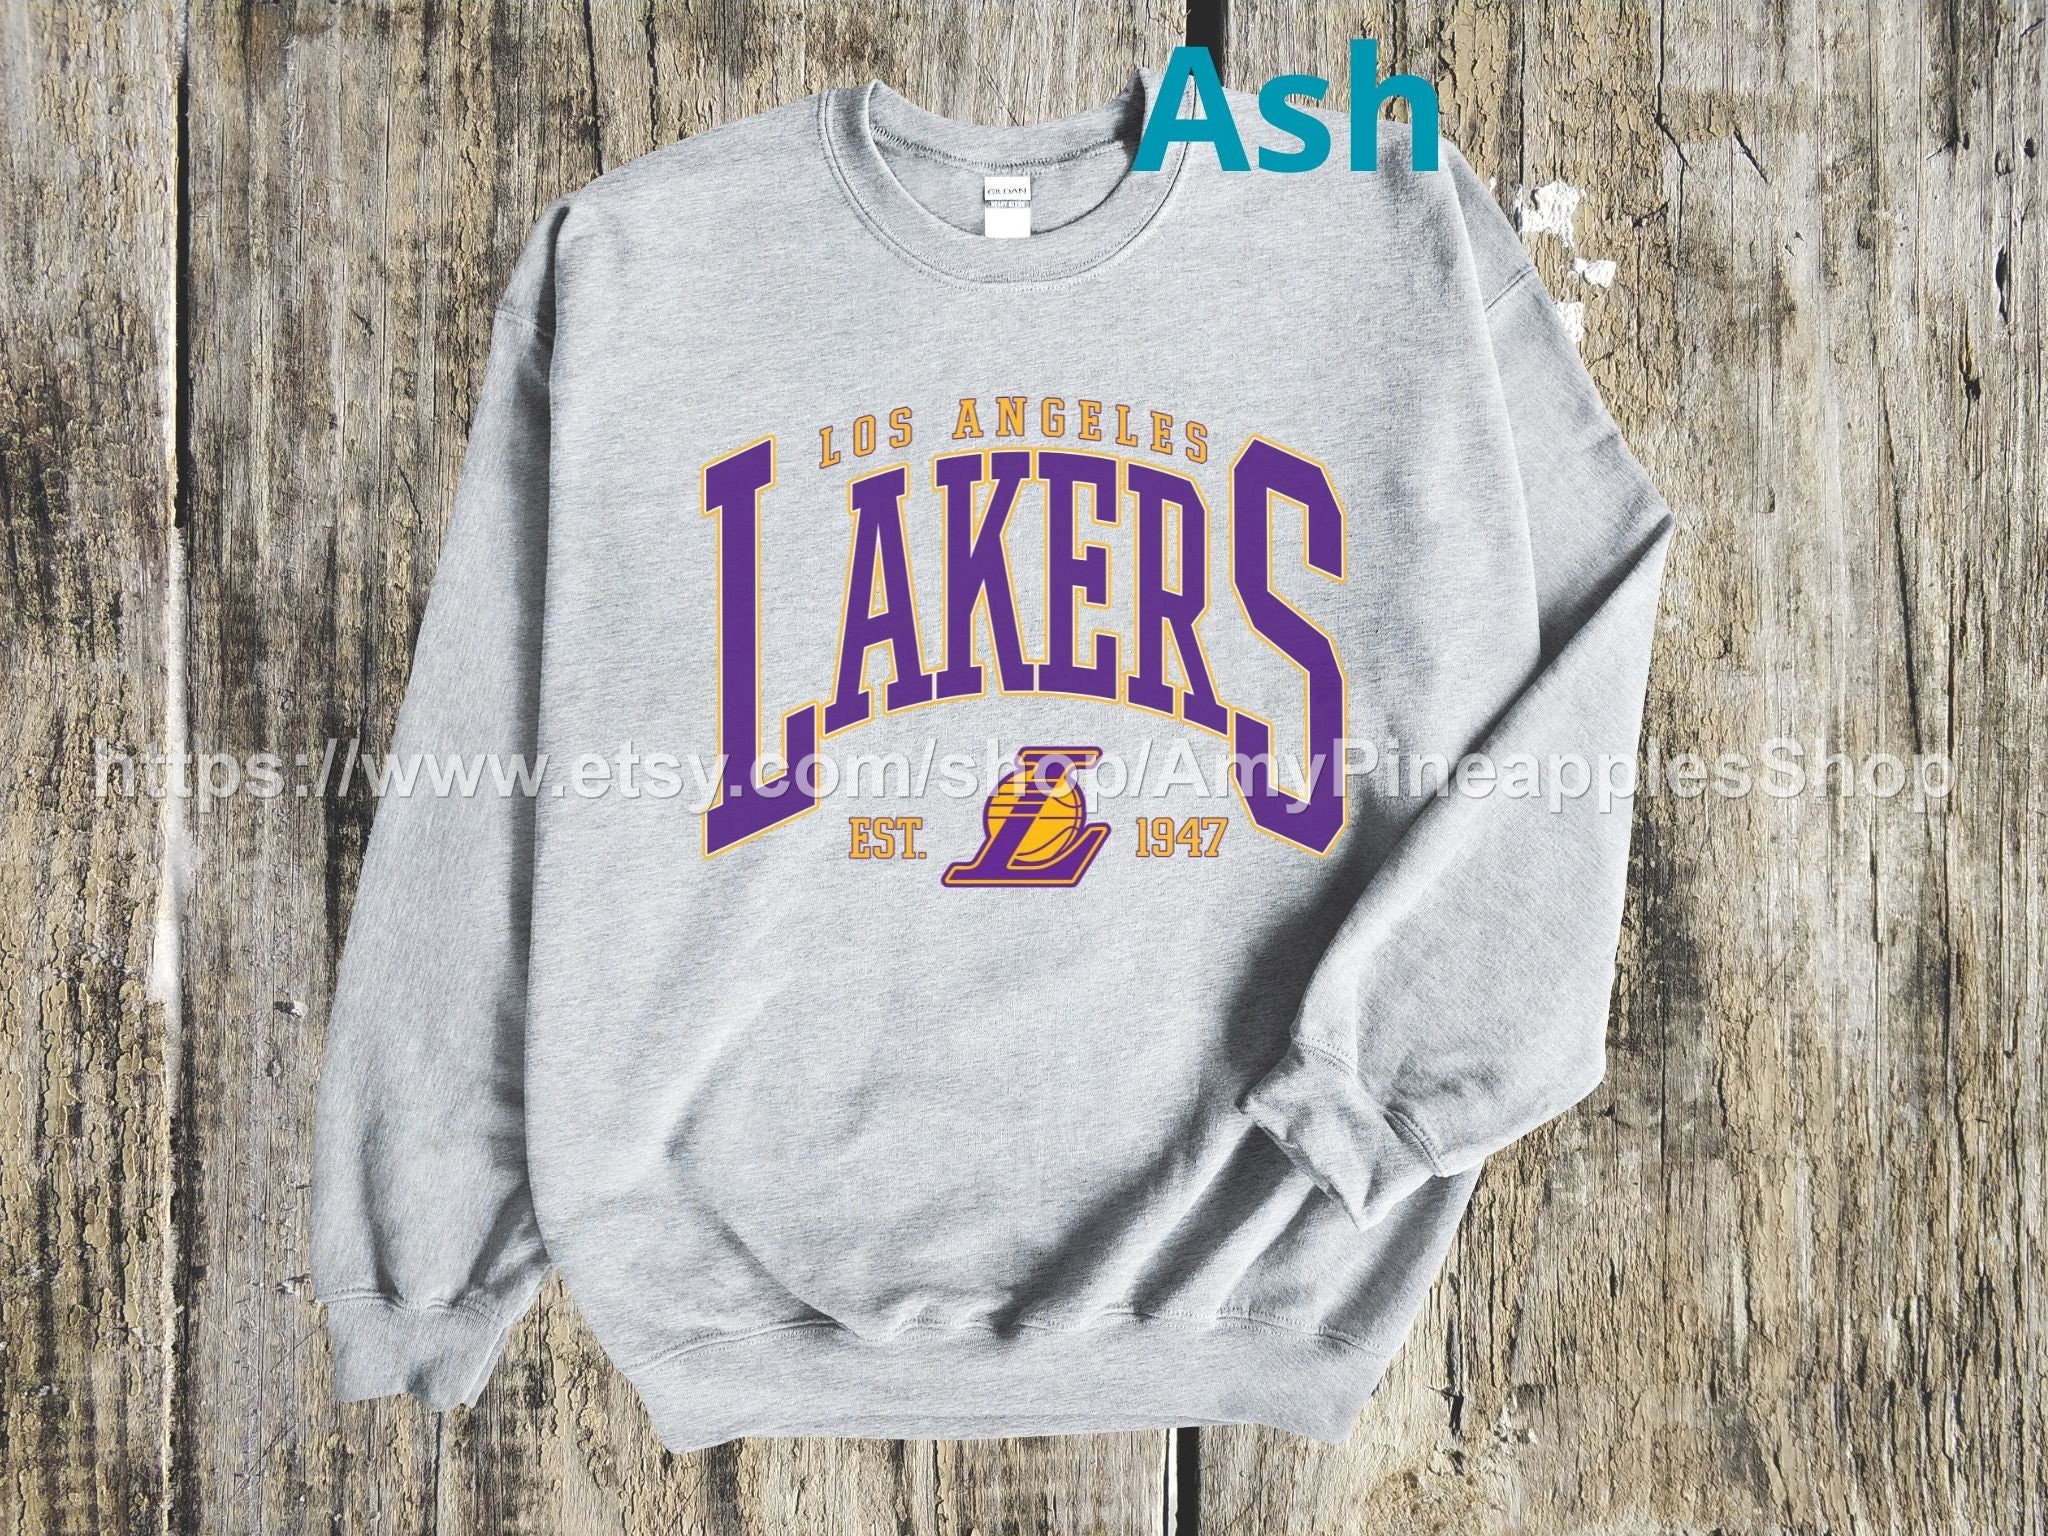 LeBron James Nike Embroidered Shirt, Los Angeles Lakers Embroidered Hoodie,  NBA Shirt for Fans - Small Gifts Great Love